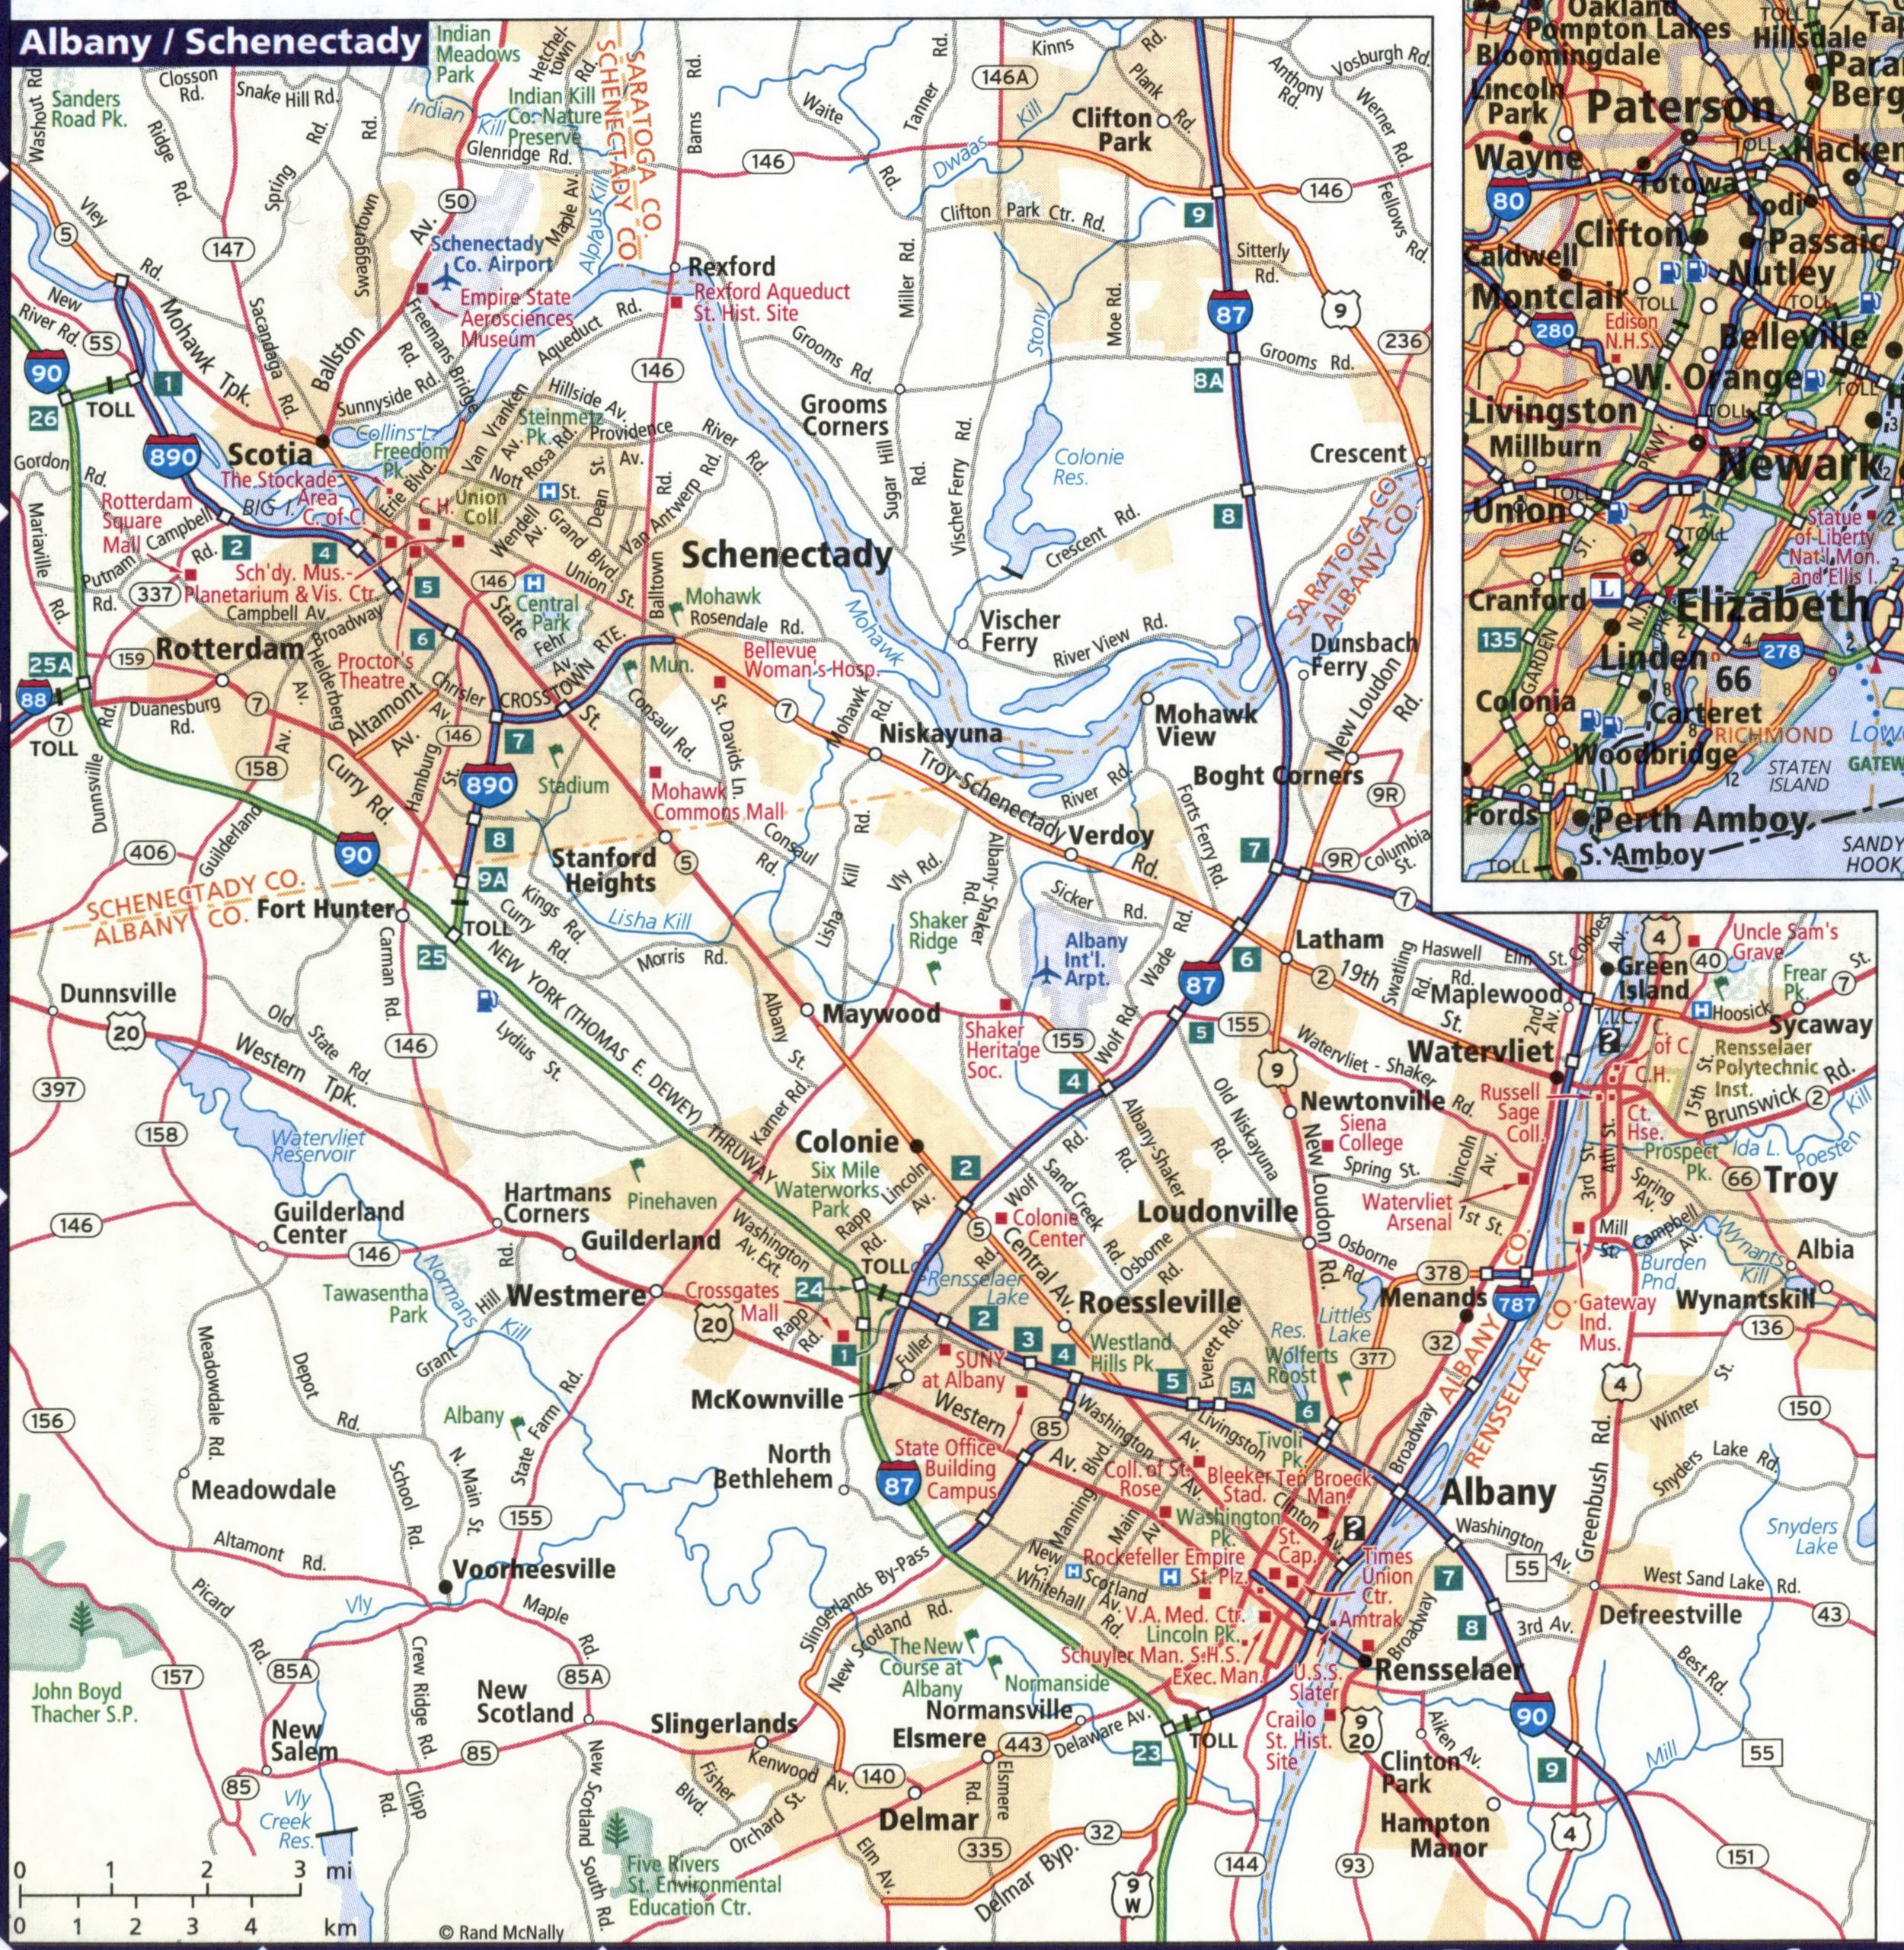 Map of Albany and Schenectady